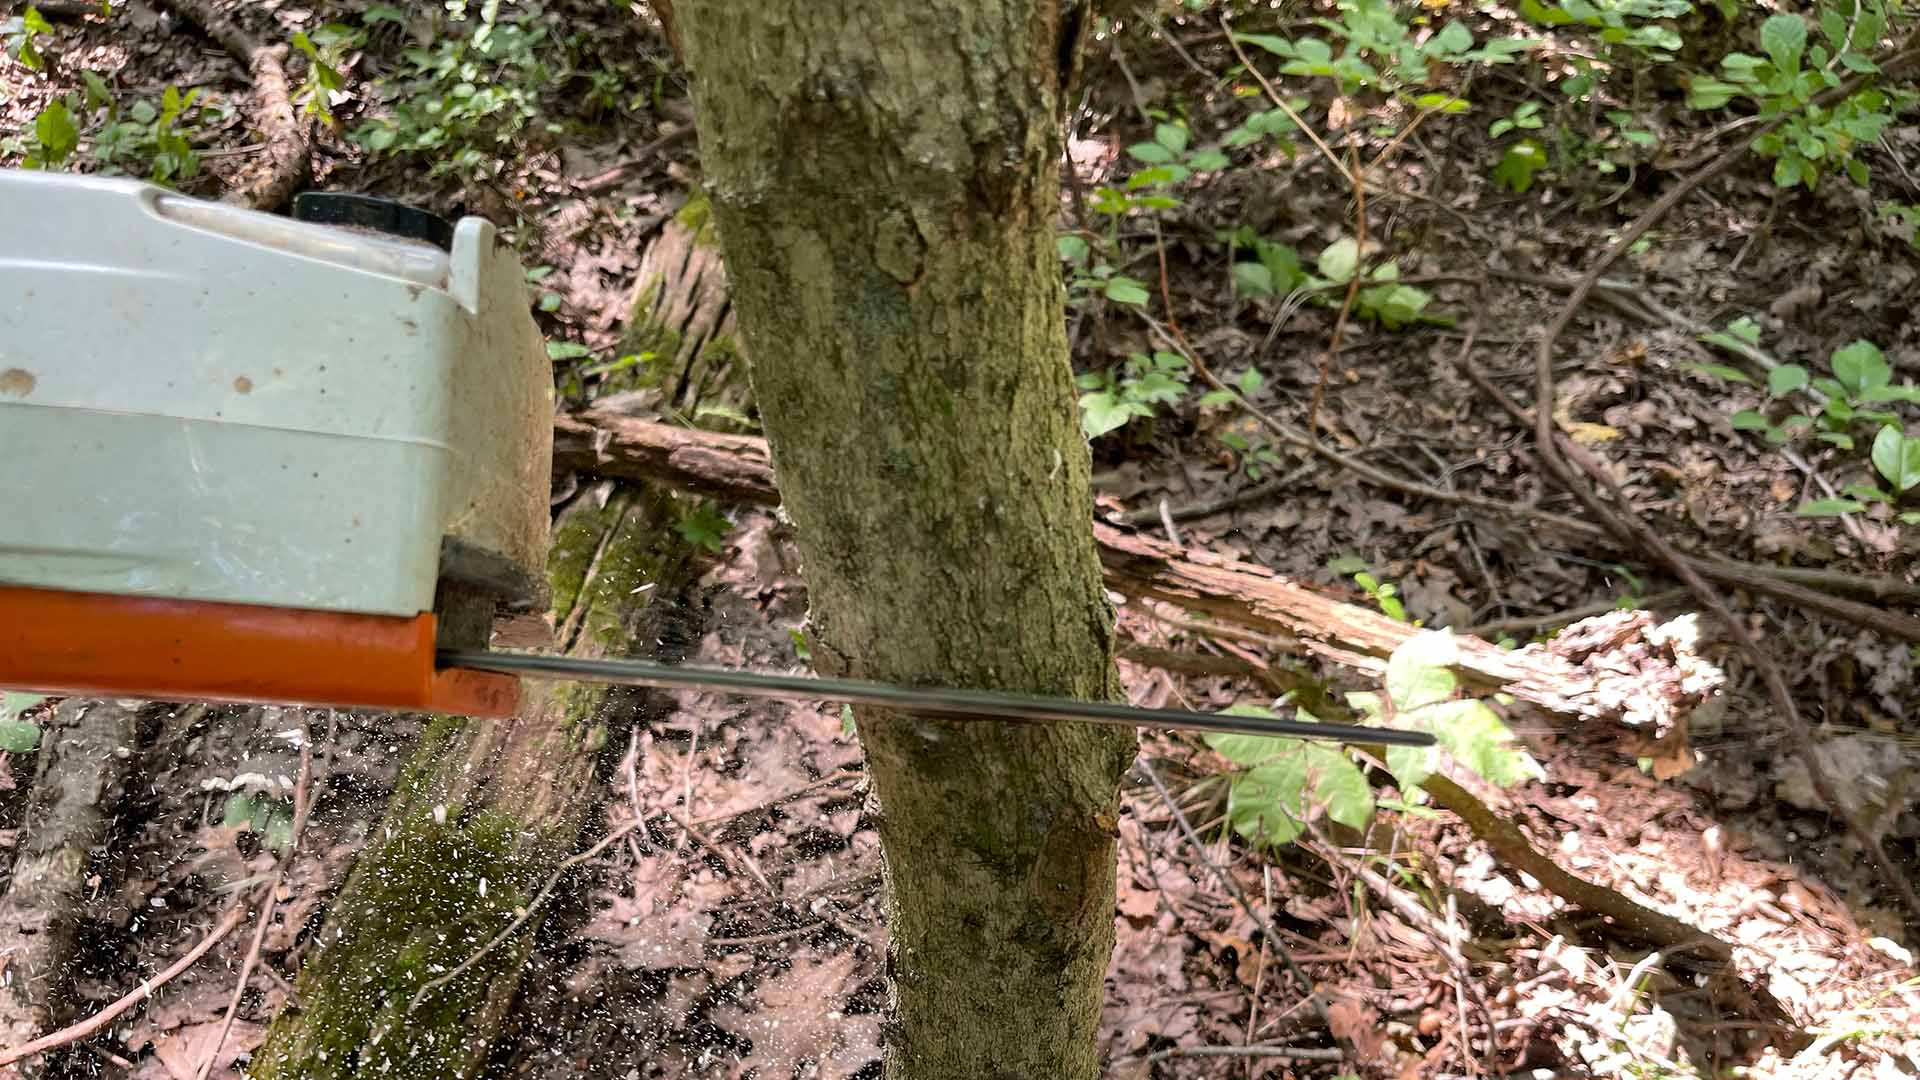 Making the first Hinge cut with a chainsaw